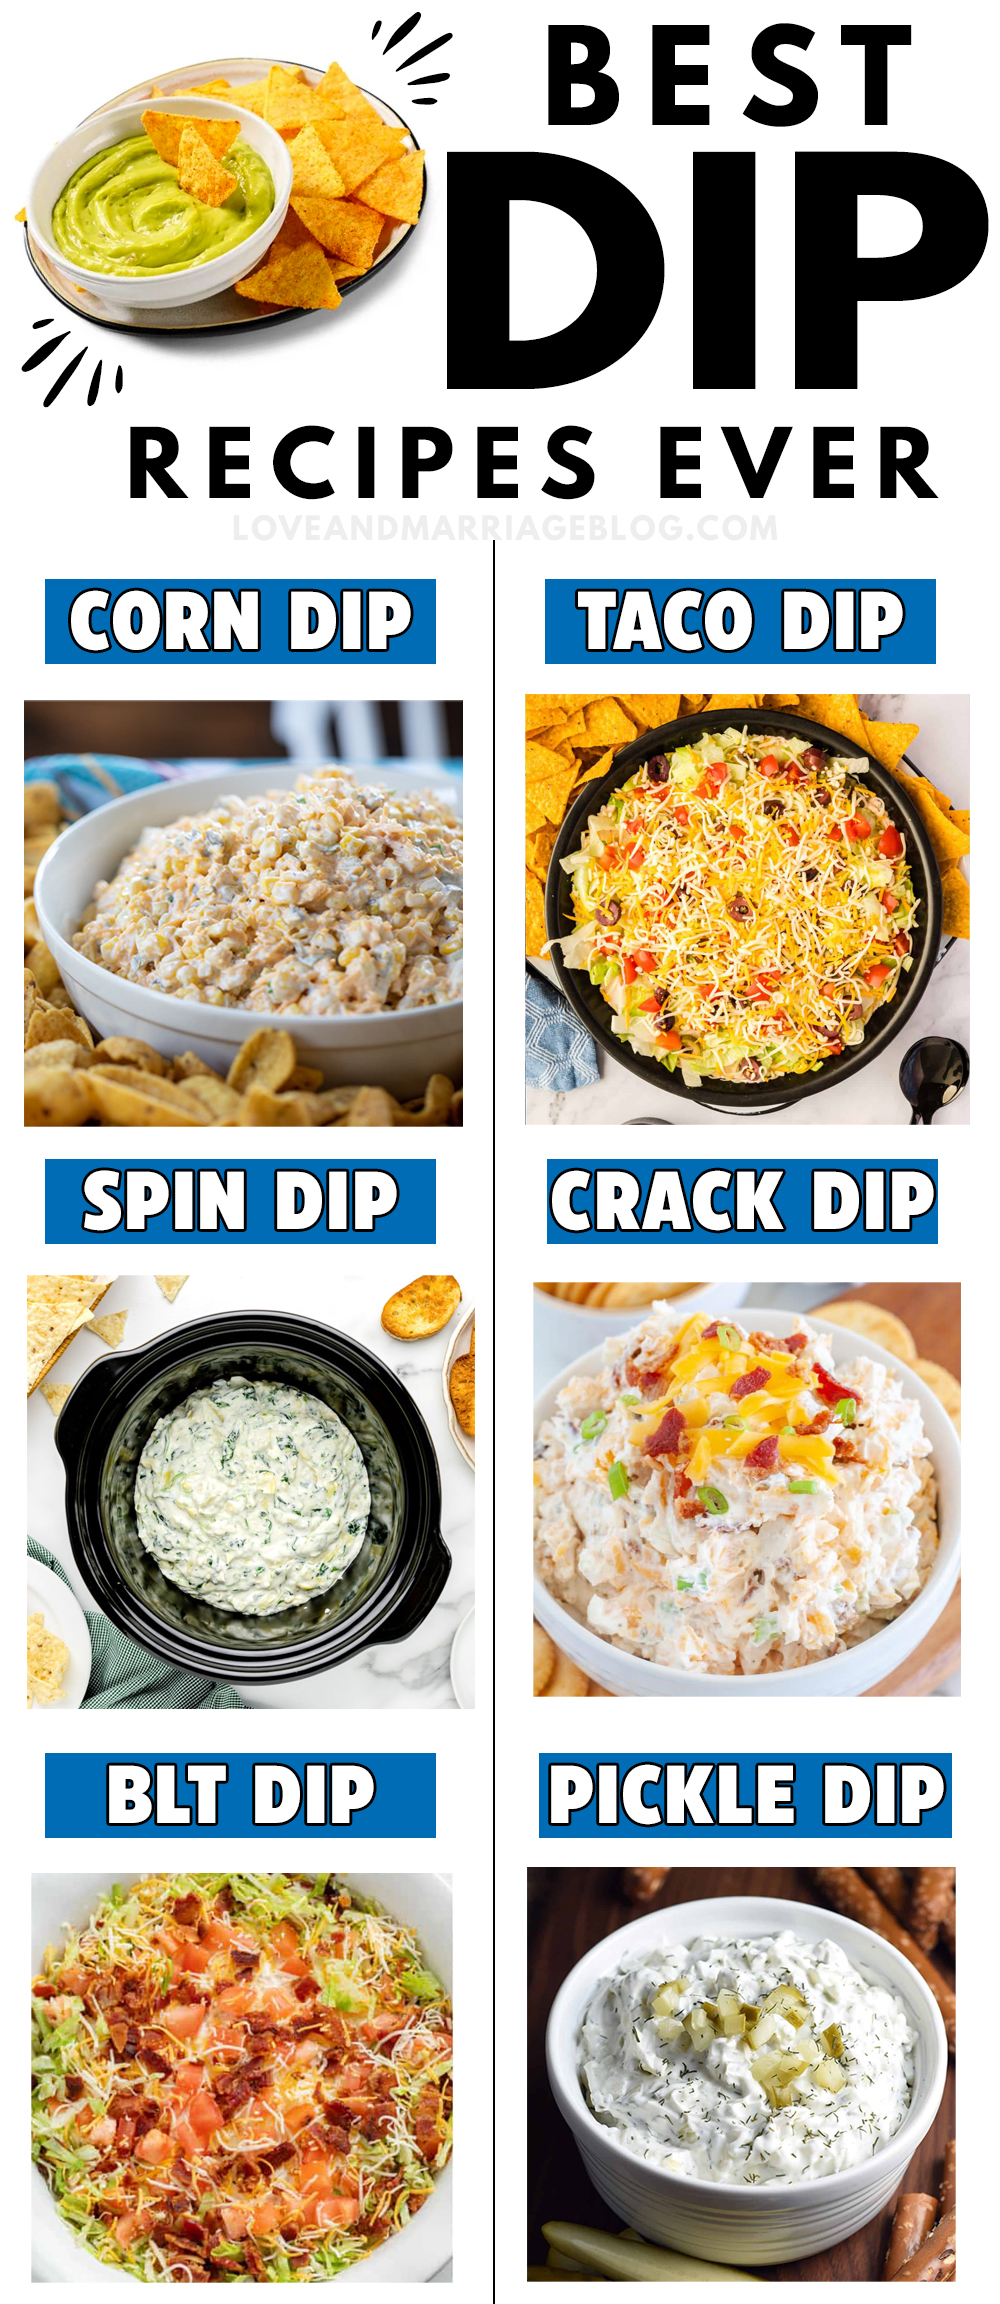 18 Delicious Dip Recipes - perfect football appetizers! 